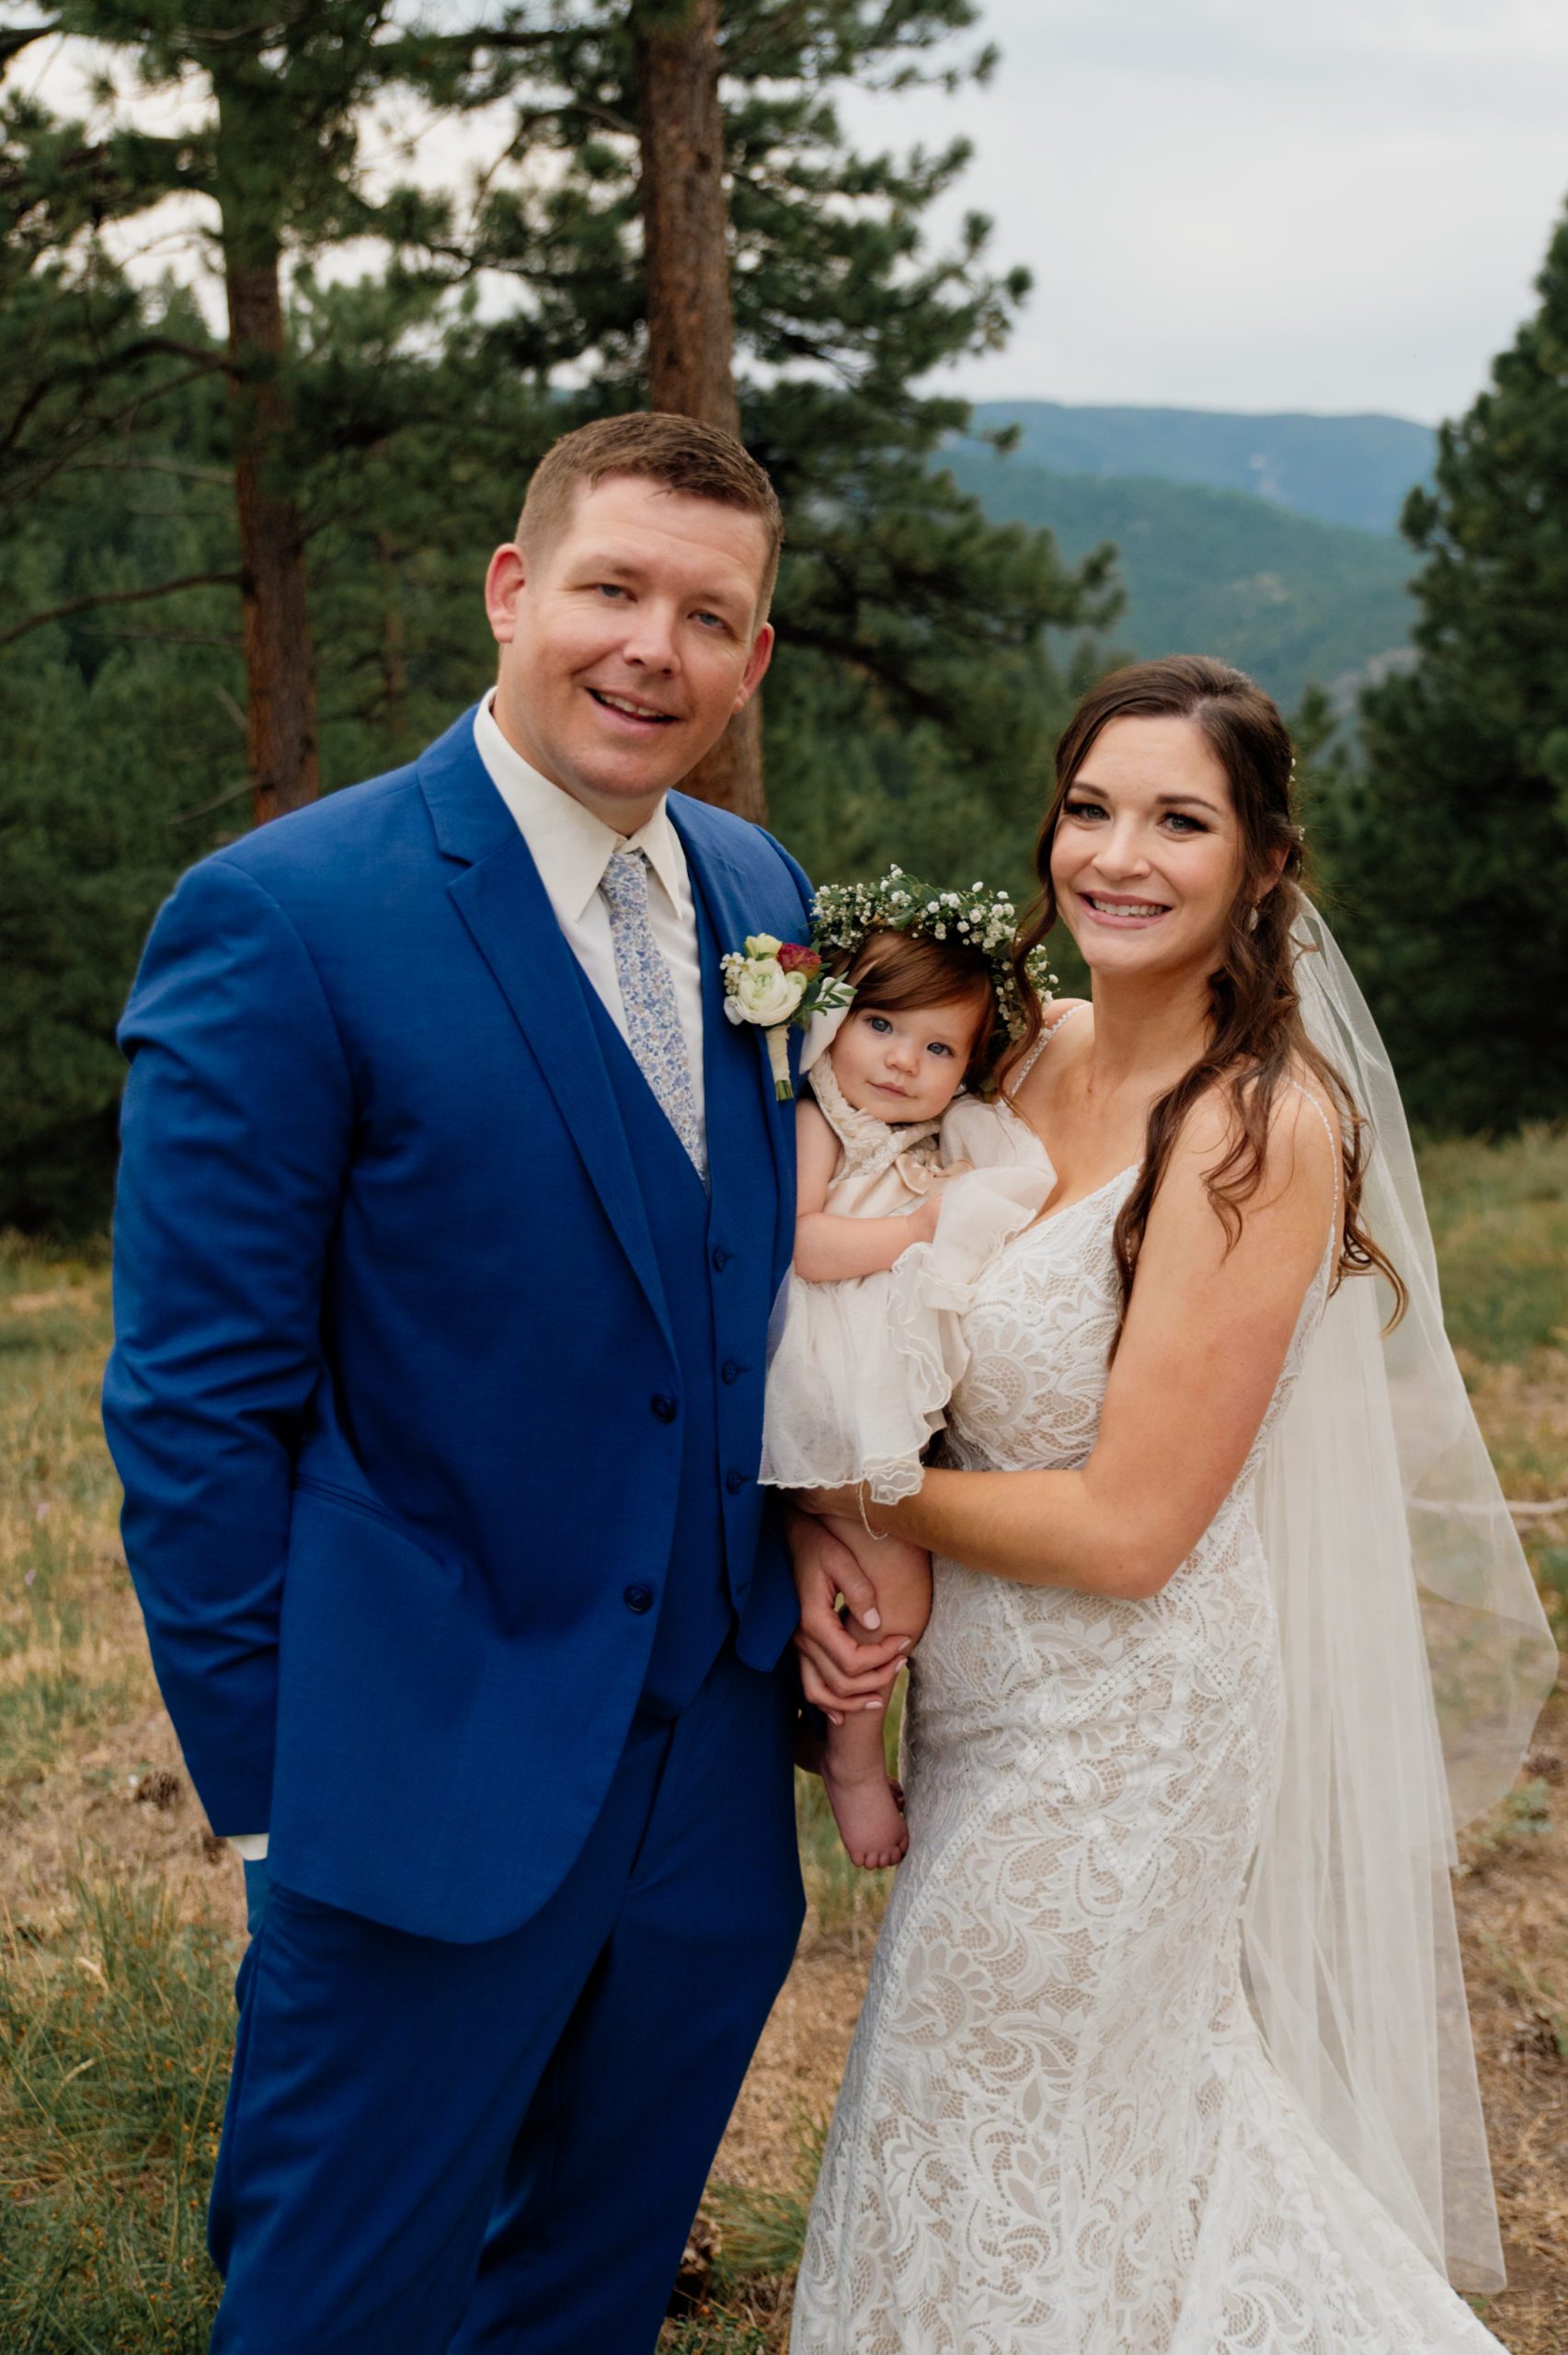 The bride and groom smile happily while holding their adorable baby girl after their ceremony at Artist Point. 